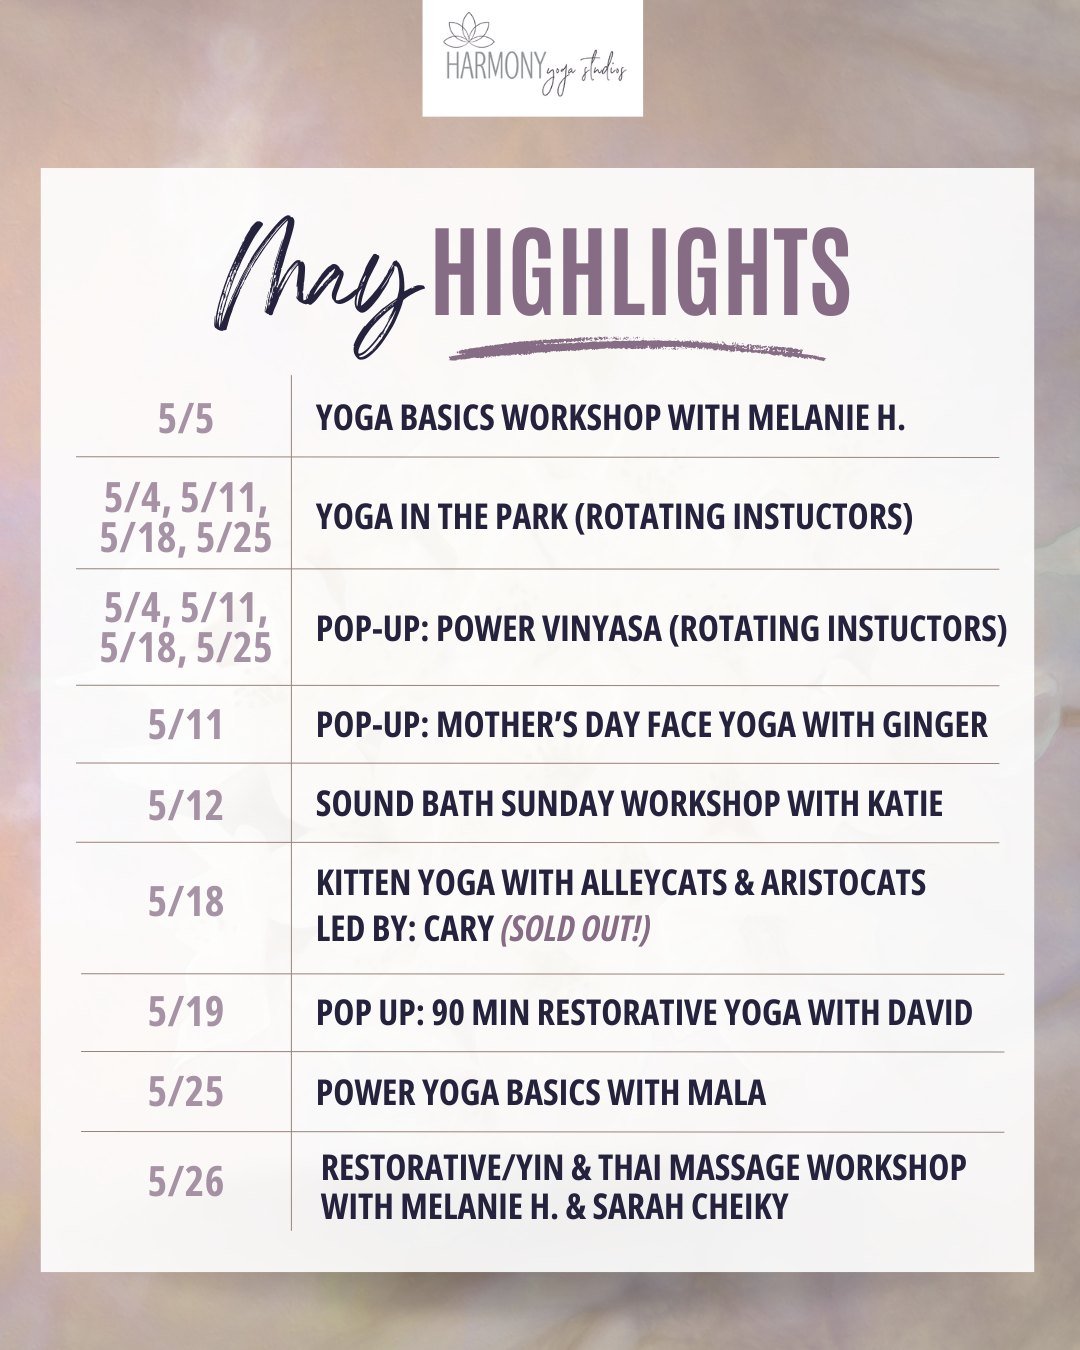 🌟 Get ready for some awesome vibes coming your way at the studio in MAY! We've got a bunch of fresh workshops and pop-up classes lined up that you won't want to miss. Whether it's a chill restorative class or something totally new, we've got you cov